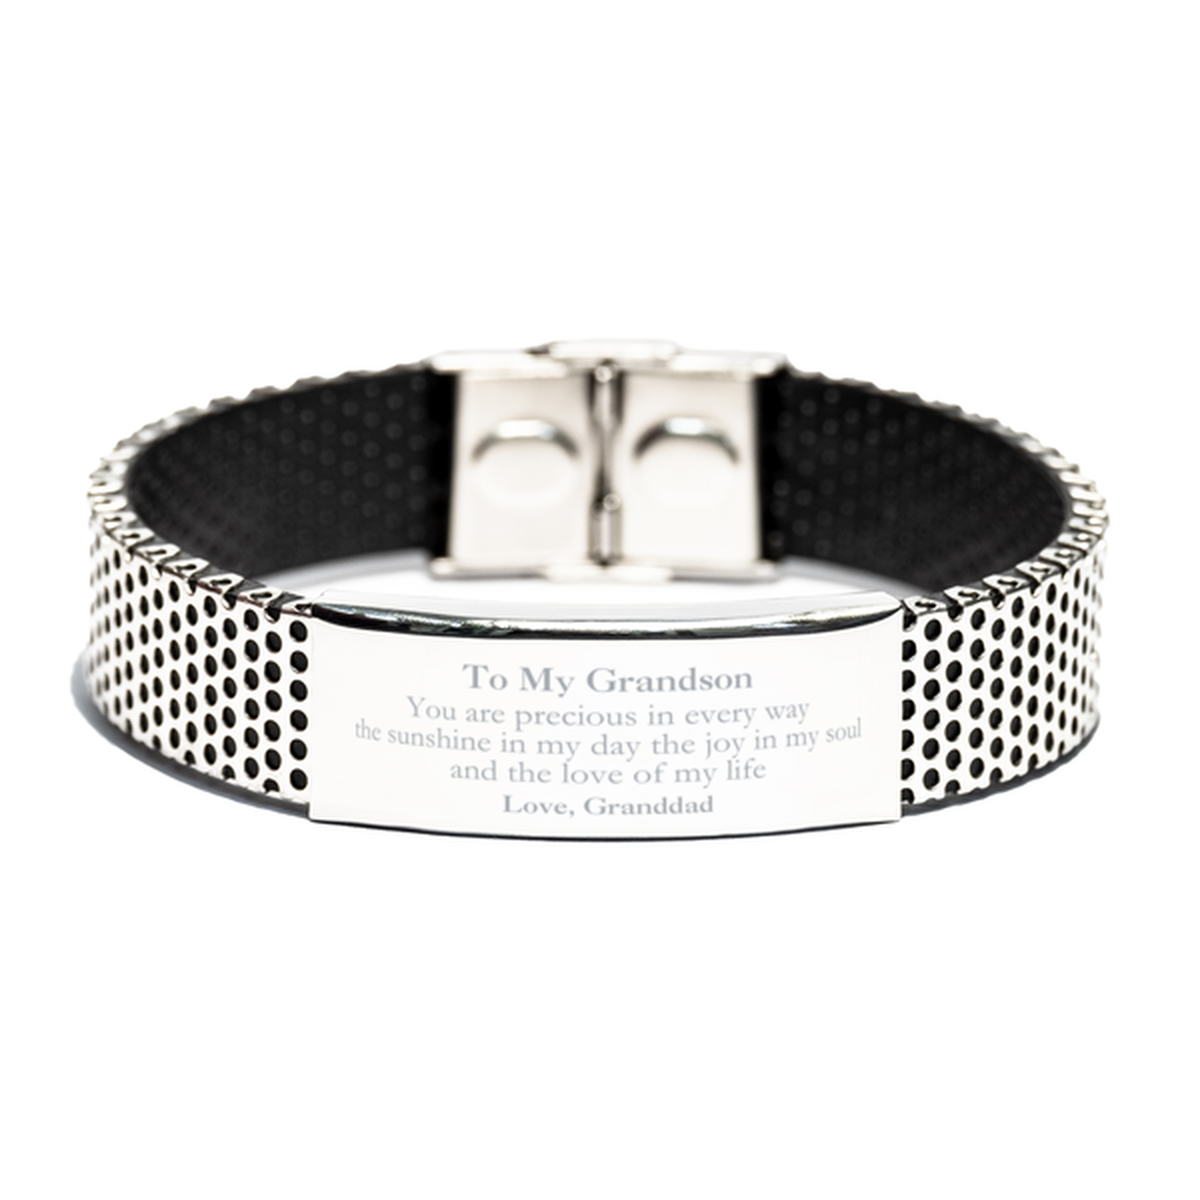 Graduation Gifts for Grandson Stainless Steel Bracelet Present from Granddad, Christmas Grandson Birthday Gifts Grandson You are precious in every way the sunshine in my day. Love, Granddad